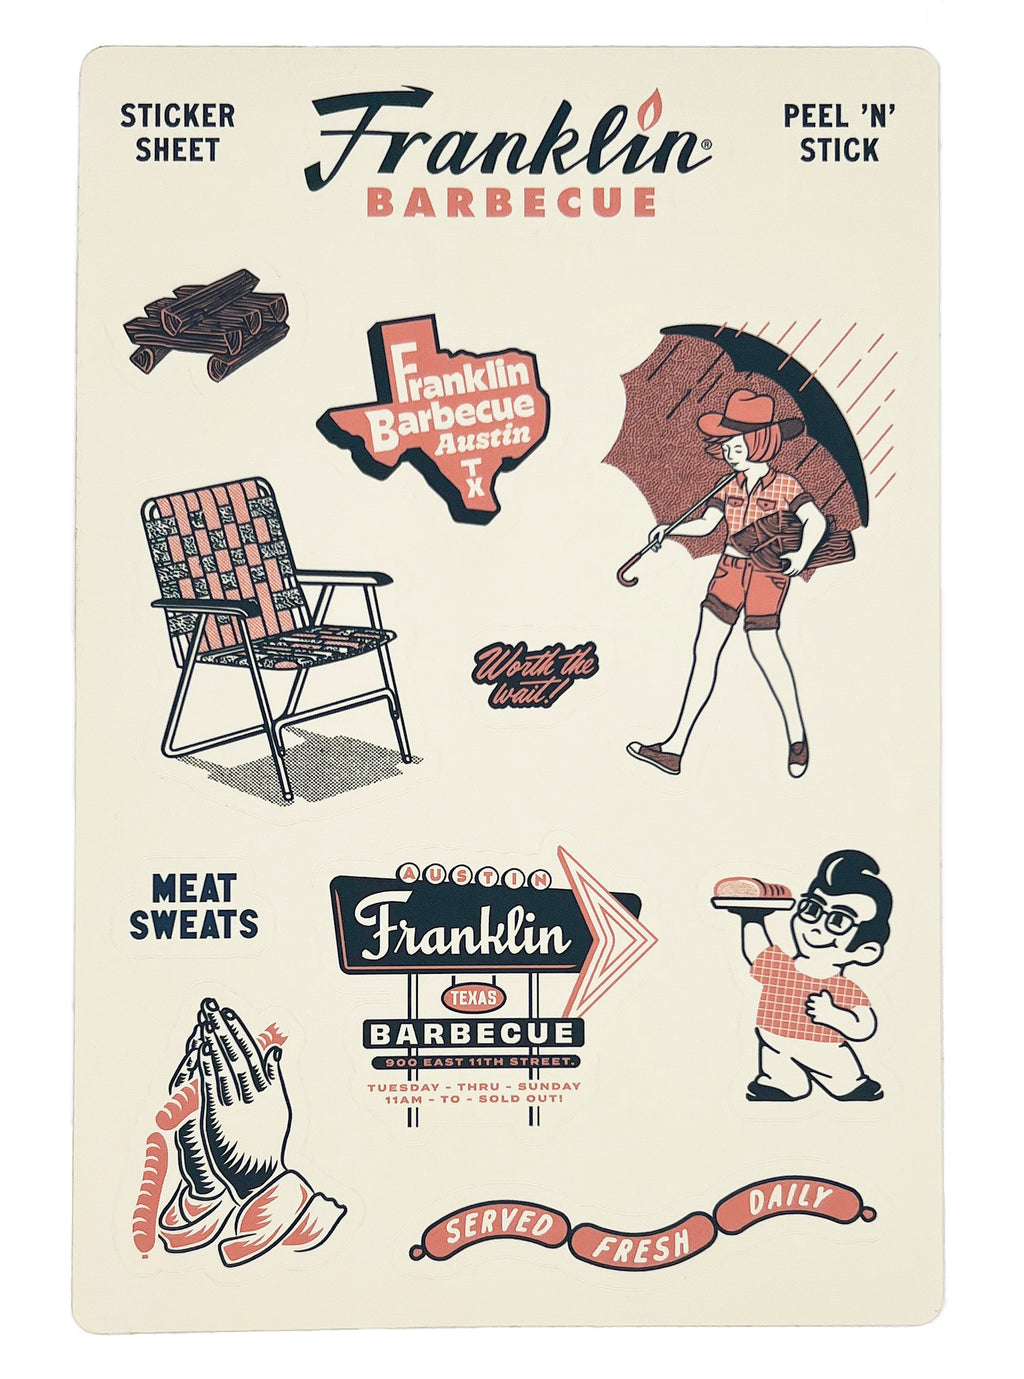 A sheet of 11 stickers. They are all black and salmon colored. Stickers include a stack of logs, a lawn chair, a kid carrying an umbrella and some wood, the Franklin sign, a tiny Aaron Franklin holding a plate of meat, praying hands holding sausage, a sticker that says "worth the wait", the state of Texas with our restaurant's name inside, a sticker that says "meat sweats" and finally a link of sausages that contain the words "served fresh daily".